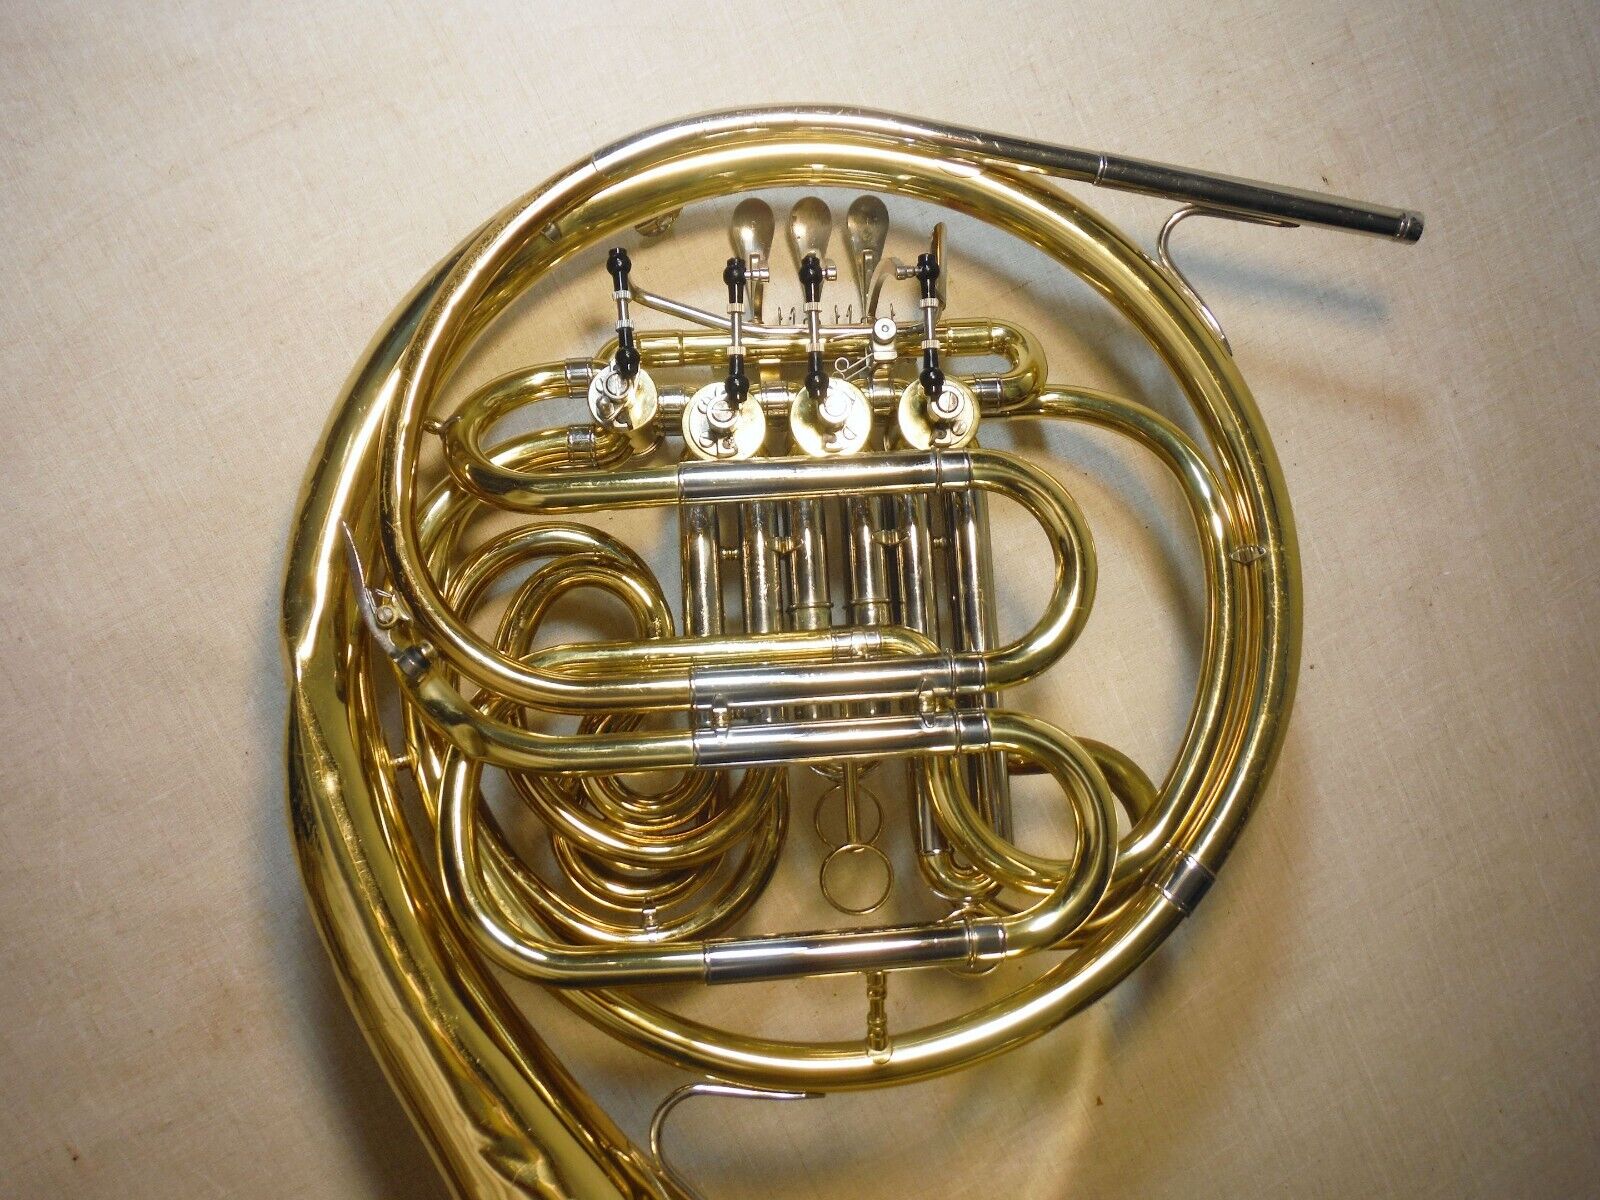 JUPITER JHR-852 DOUBLE FRENCH HORN BRASS WORKING GOOD W/DENTS CASE MOUTHPIECE 6